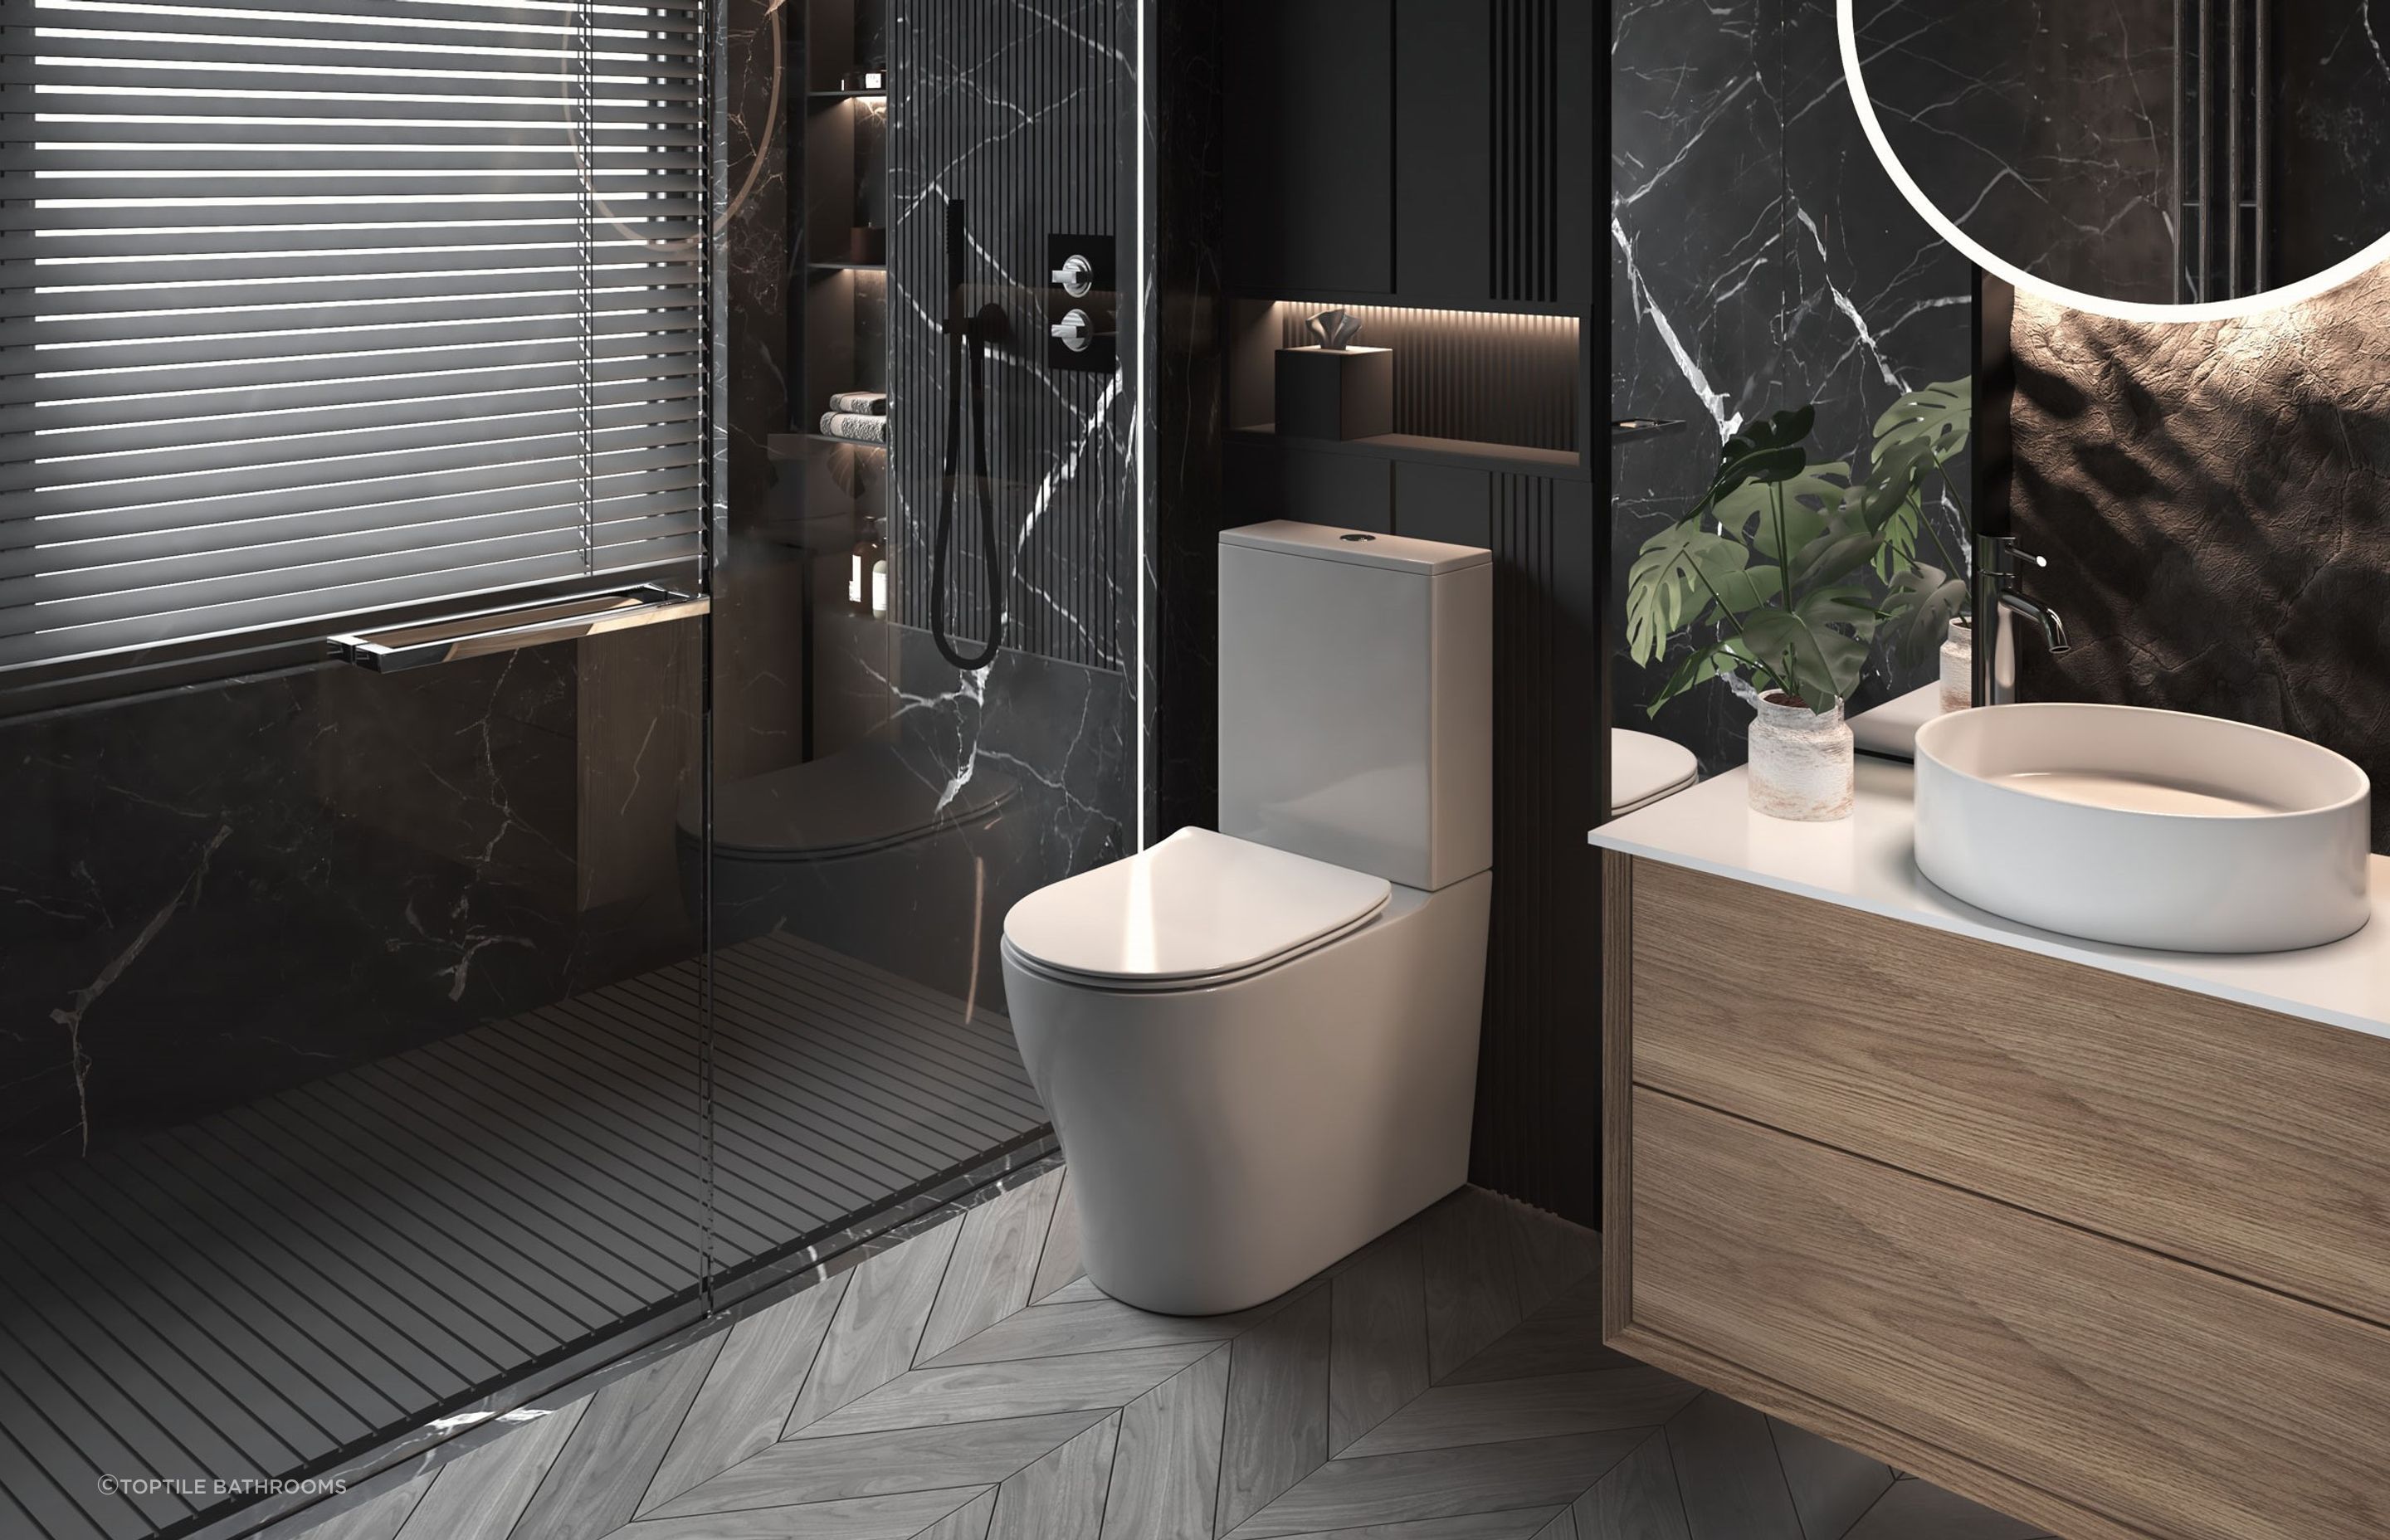 The ultra quiet flush feature of the Rimfree Duron T1 Toilet Suite is just one of its game-changing features.